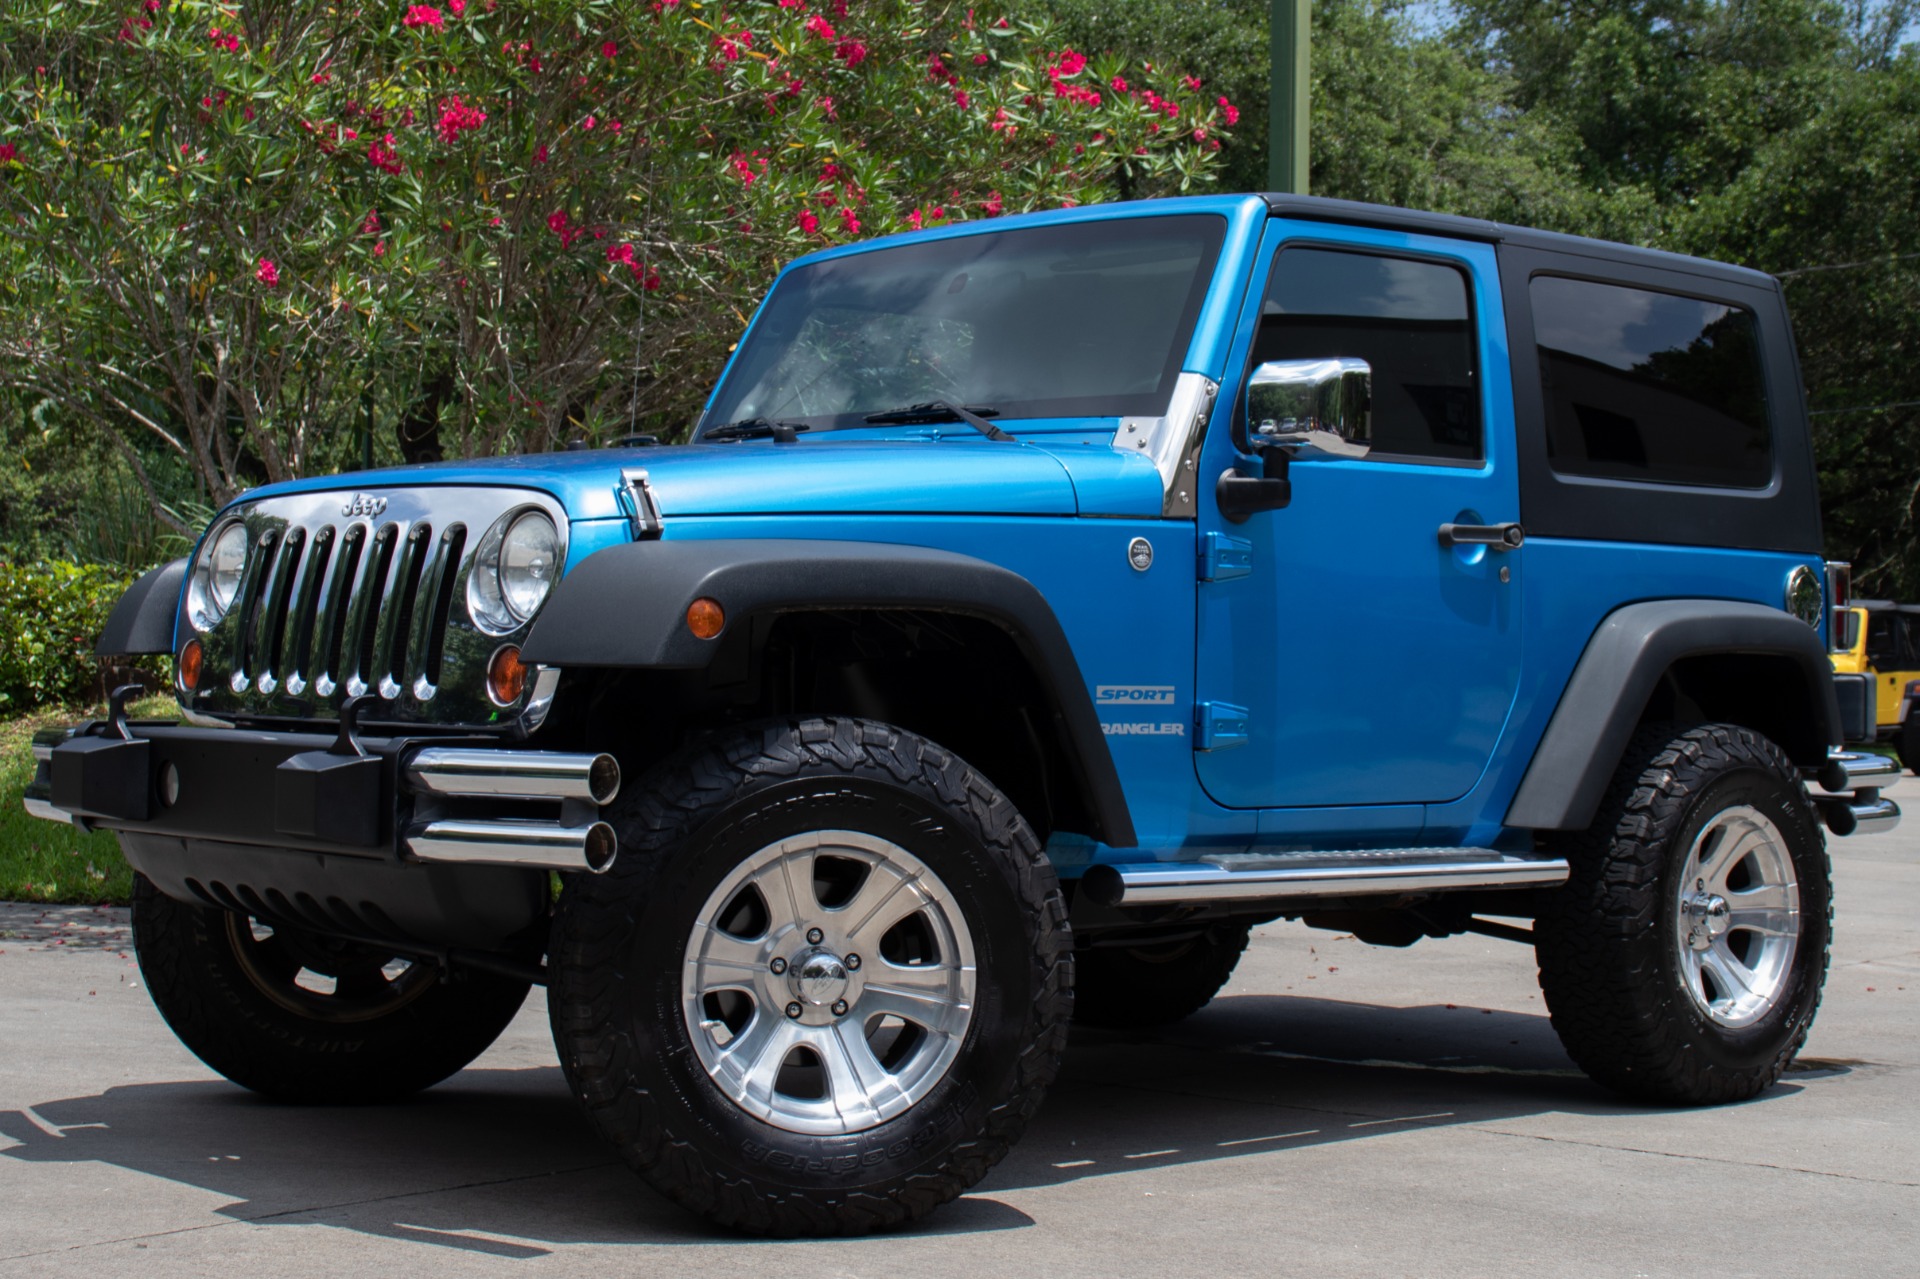 Used 2004 Jeep Wrangler Unlimited For Sale ($20,995 